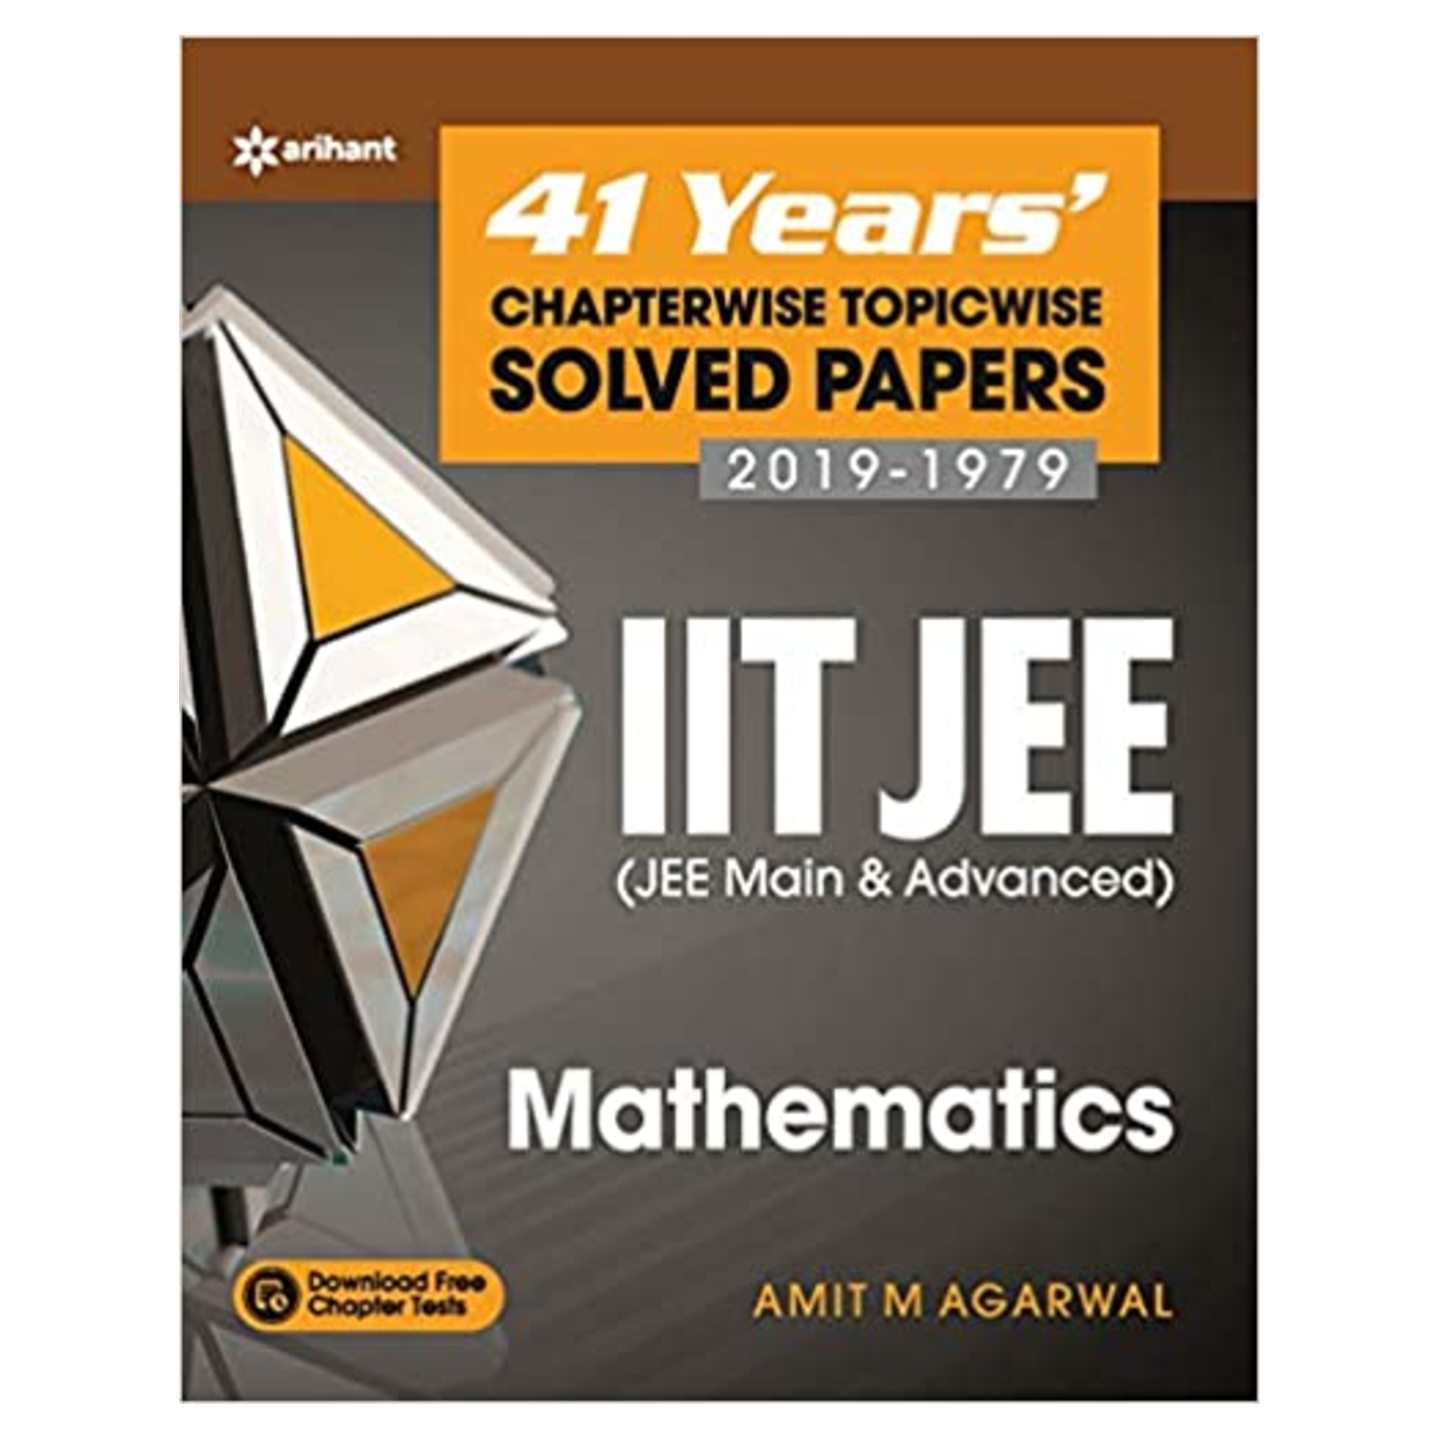 41 Years Chapterwise Topicwise Solved Papers 2019-1979